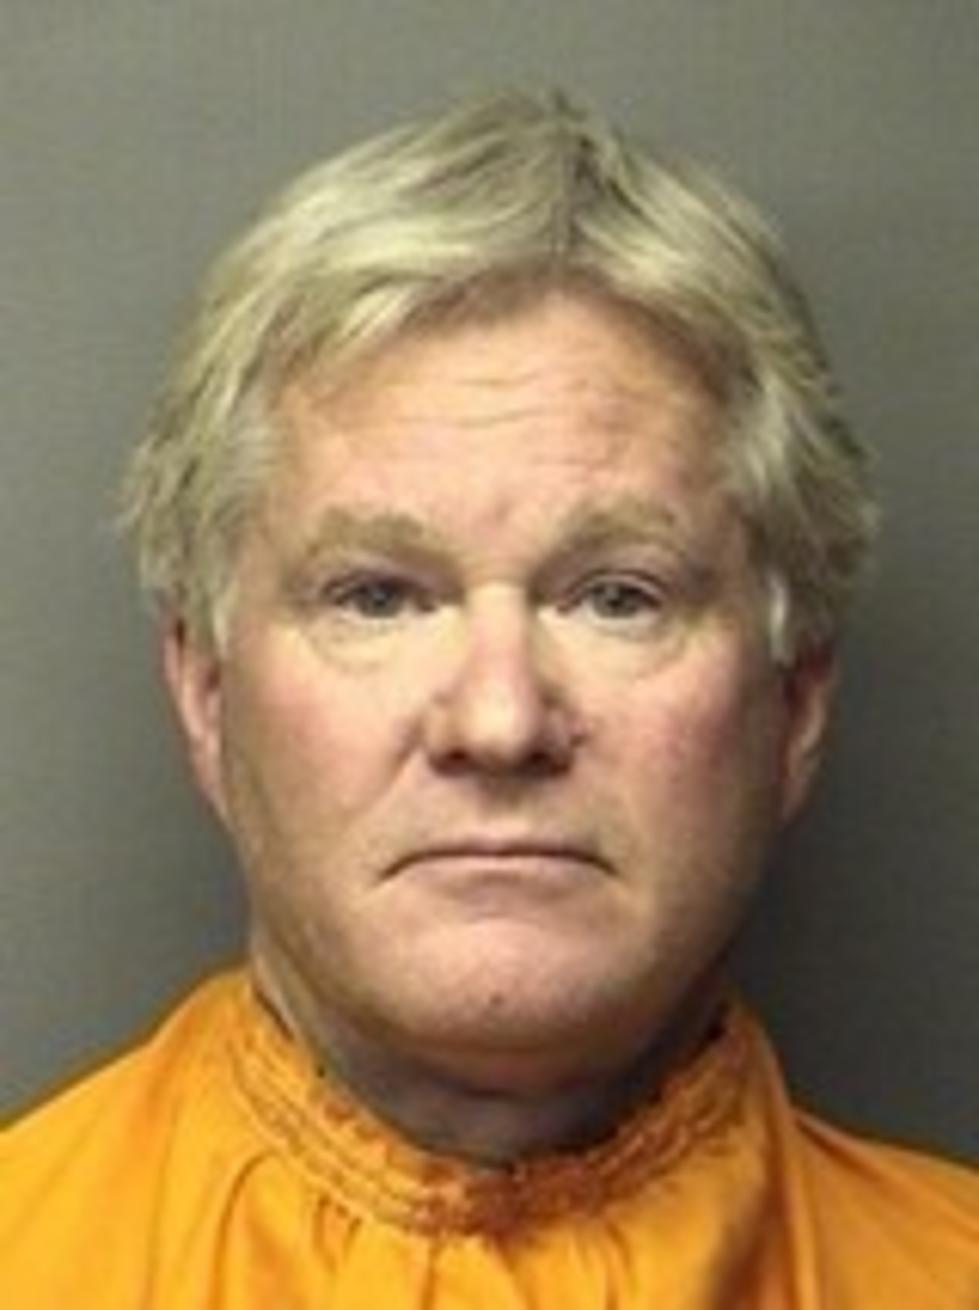 Clay County Resident Arrested for Aggravated Sexual Assault